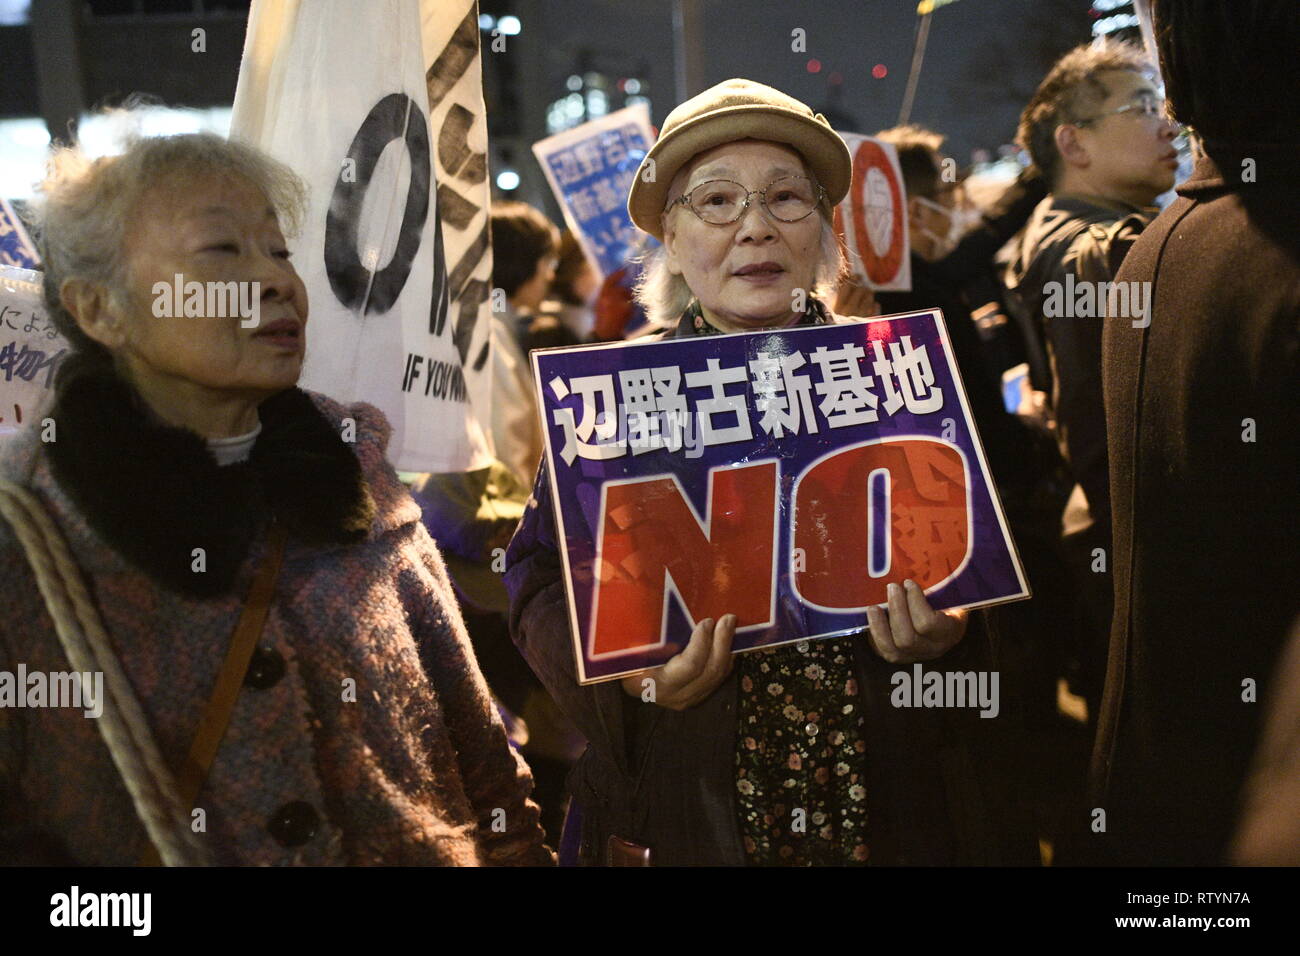 TOKYO, JAPAN - MARCH 1: Protesters stage a demonstration in front of Prime Ministers residence to protest against the U.S base in Japan on March 1, 2019 in Tokyo, Japan. The protests are part of wider demonstrations on the island against the government on-going relocation of the US Marine Corps Air Station Futenma to the Henoko district of Nago, Okinawa Prefecture. The residents of Japan's southwestern island region of Okinawa rejected a relocation plan for a U.S. military base in the Feb. 24 referendum, increasing pressure on the national government to change its stance that the facility will Stock Photo